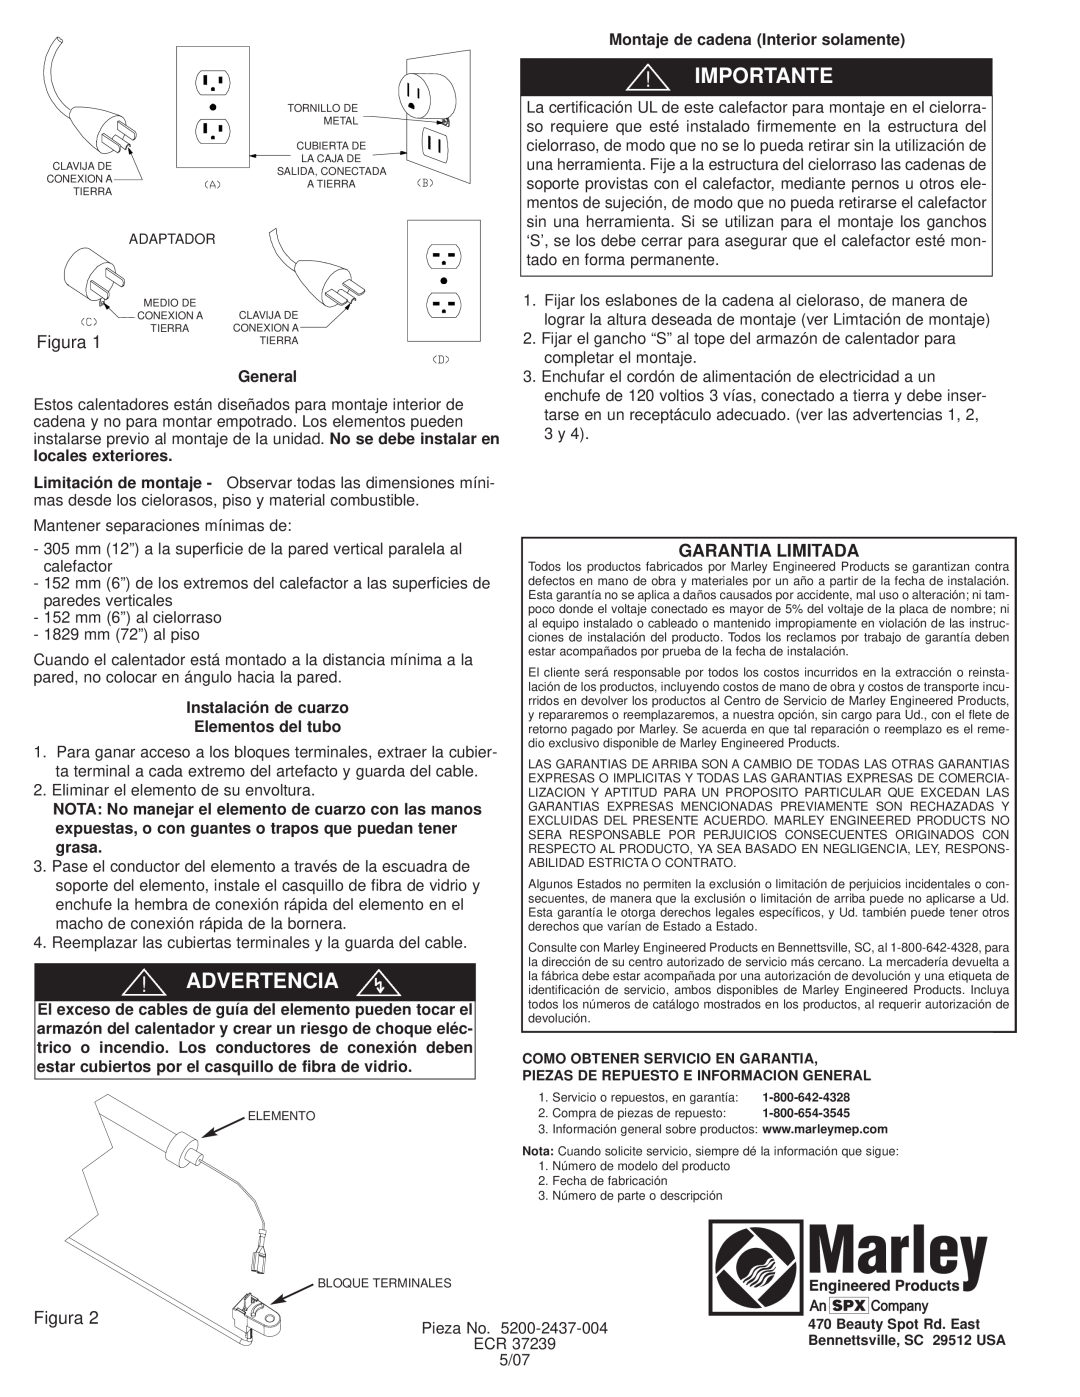 Marley Engineered Products FRR10512B instruction sheet C Ia, Import Ante, Itad A, Fig ura, Ver Ten 